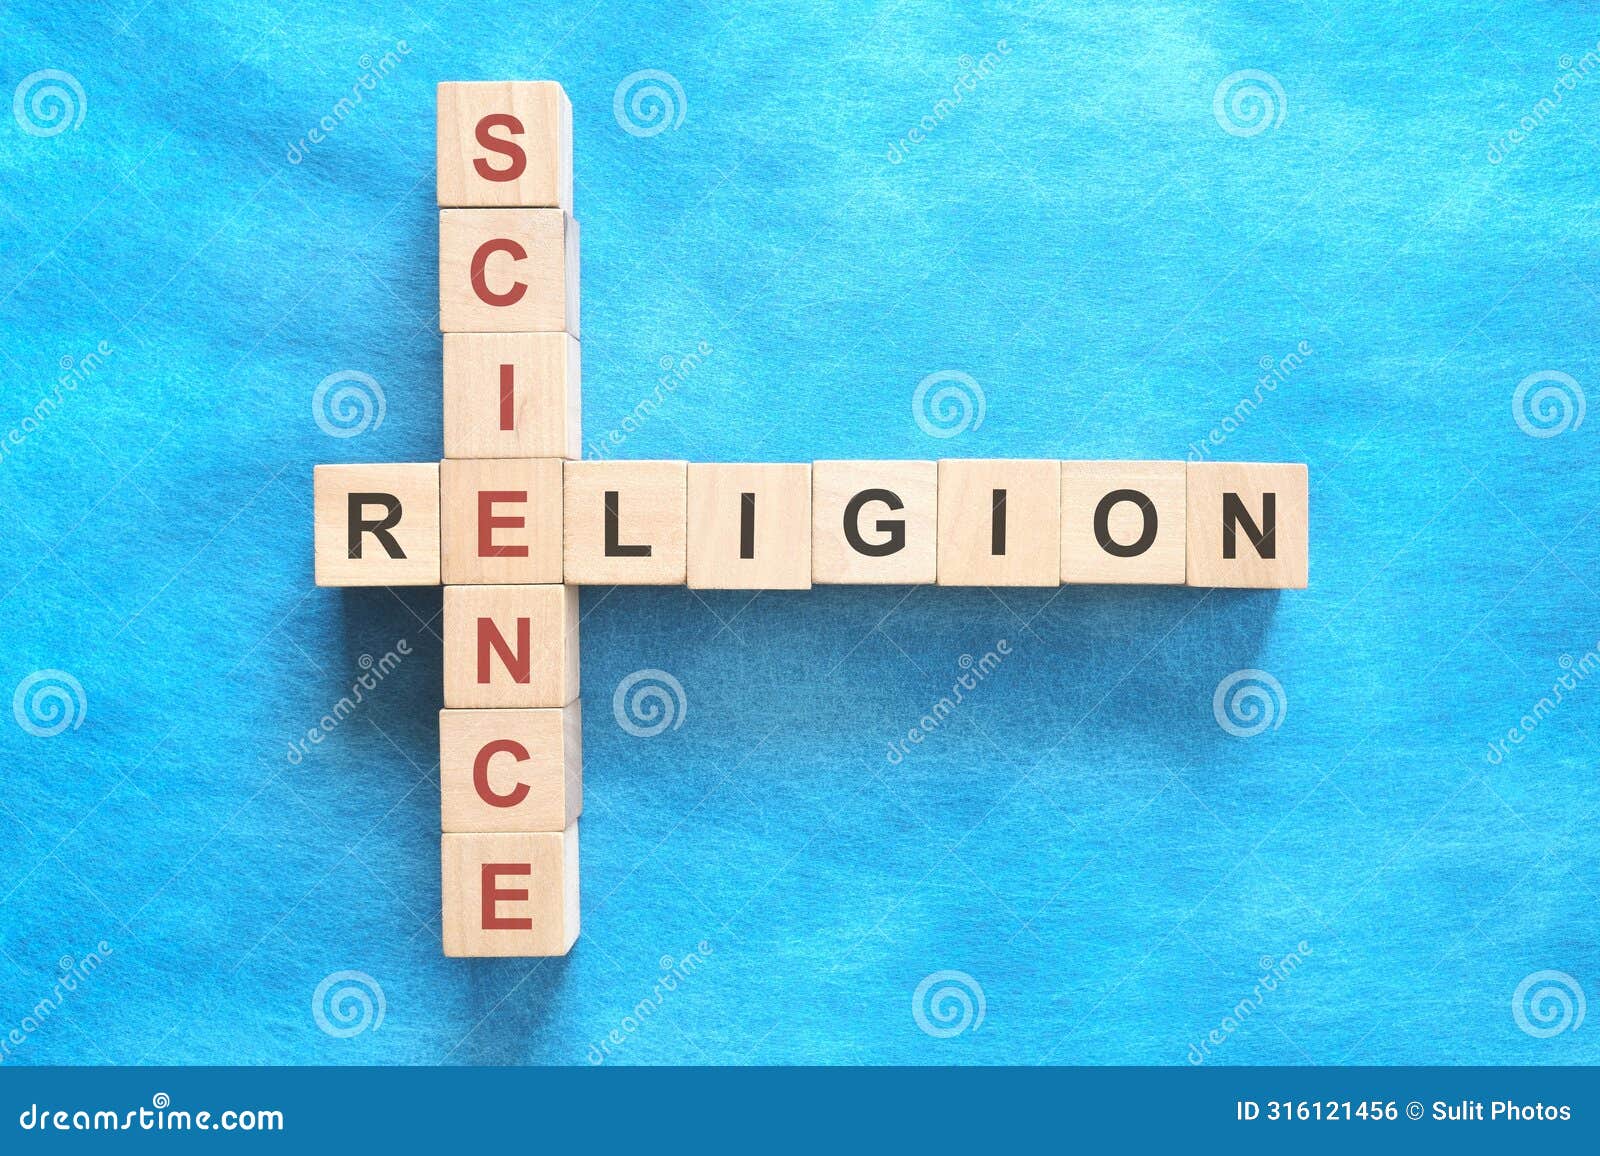 science and religion relationship and interconnection concept. crossword puzzle flat lay in blue background.